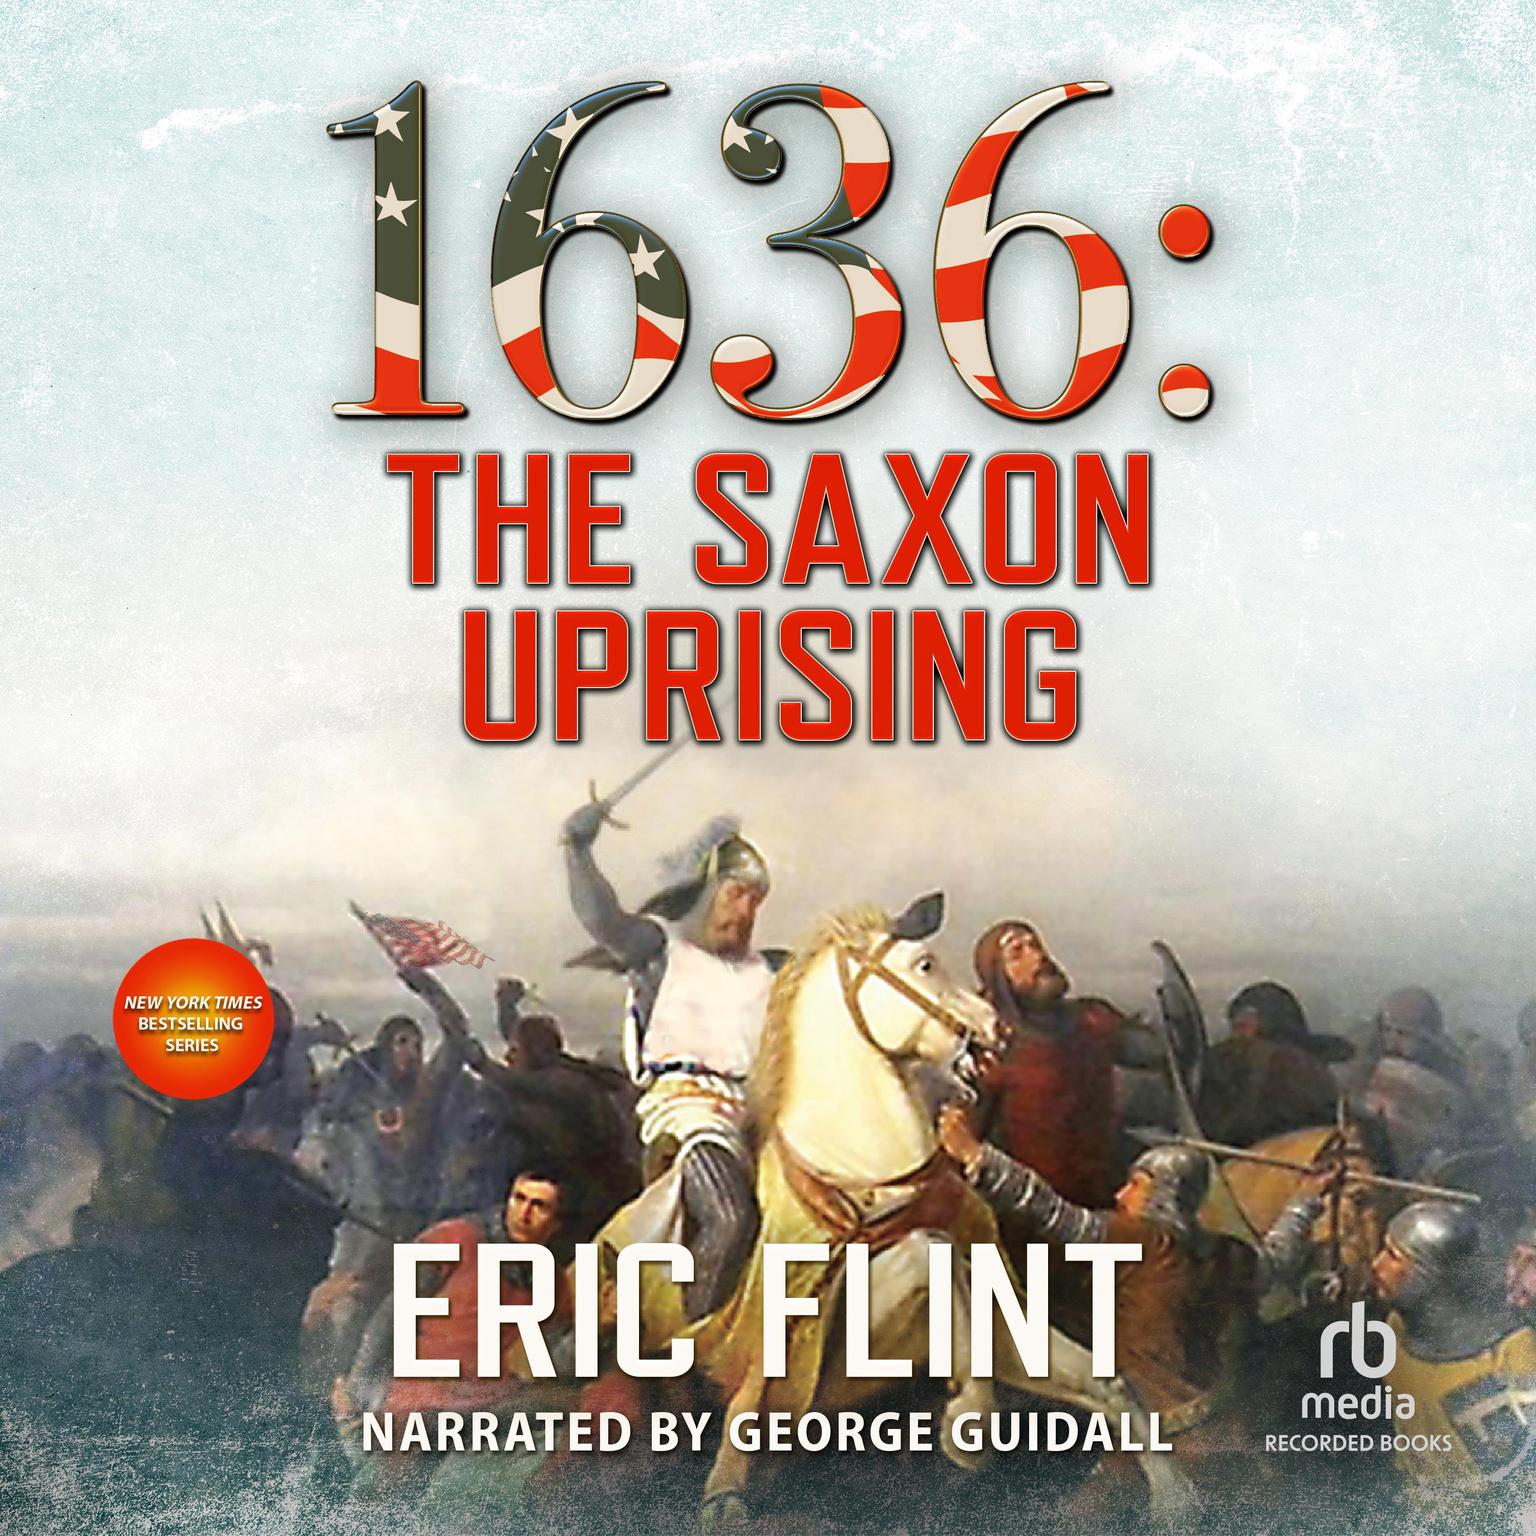 1636: The Saxon Uprising Audiobook, by Eric Flint